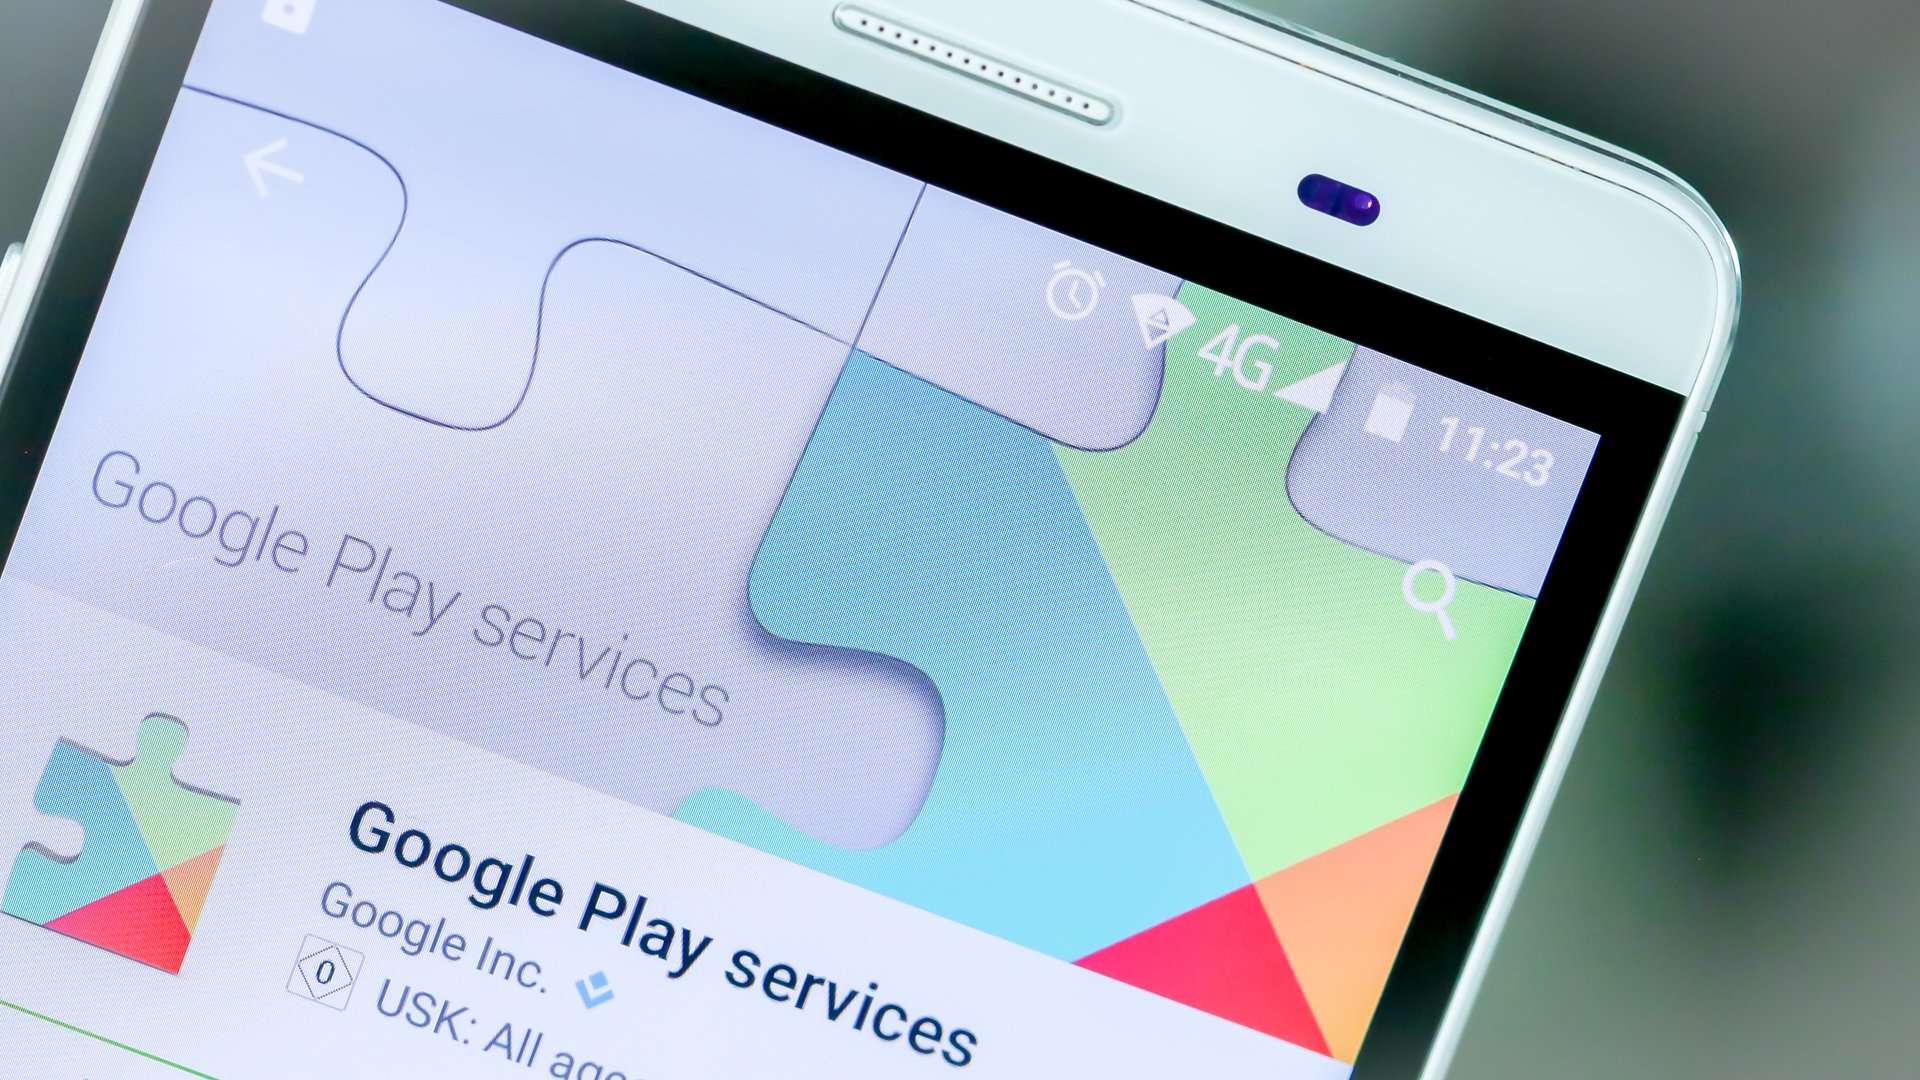 Update Google Play Services 4.4 4